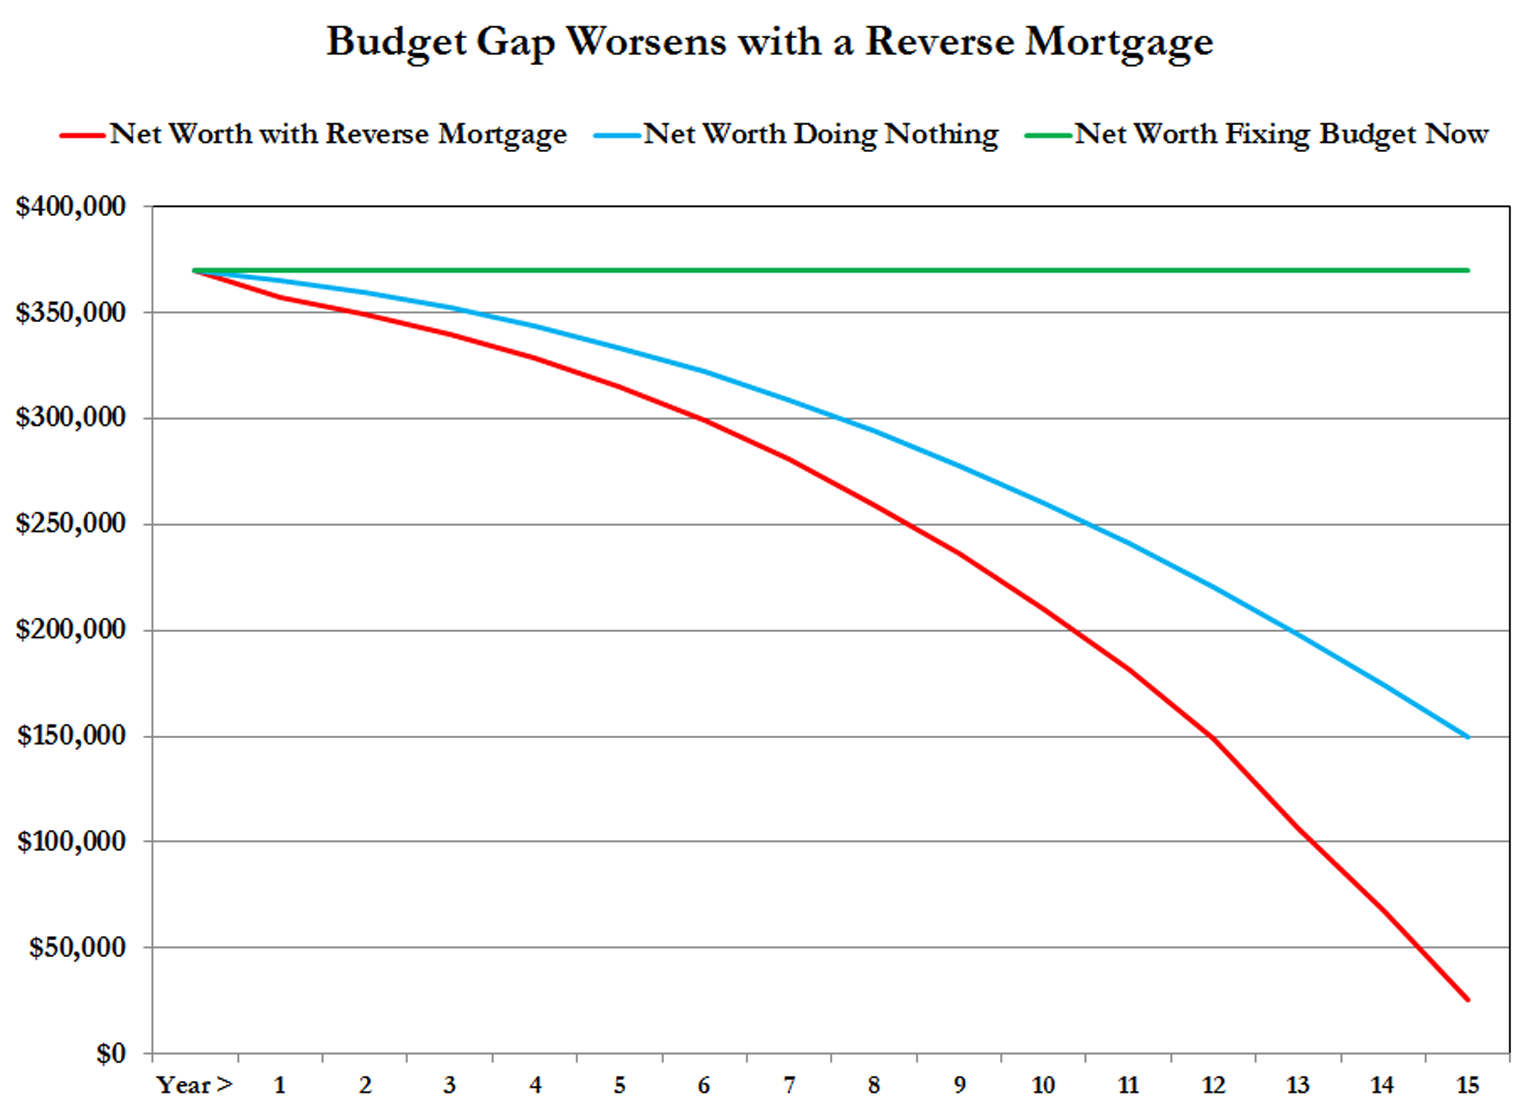 reverse mortgages hurt budgets